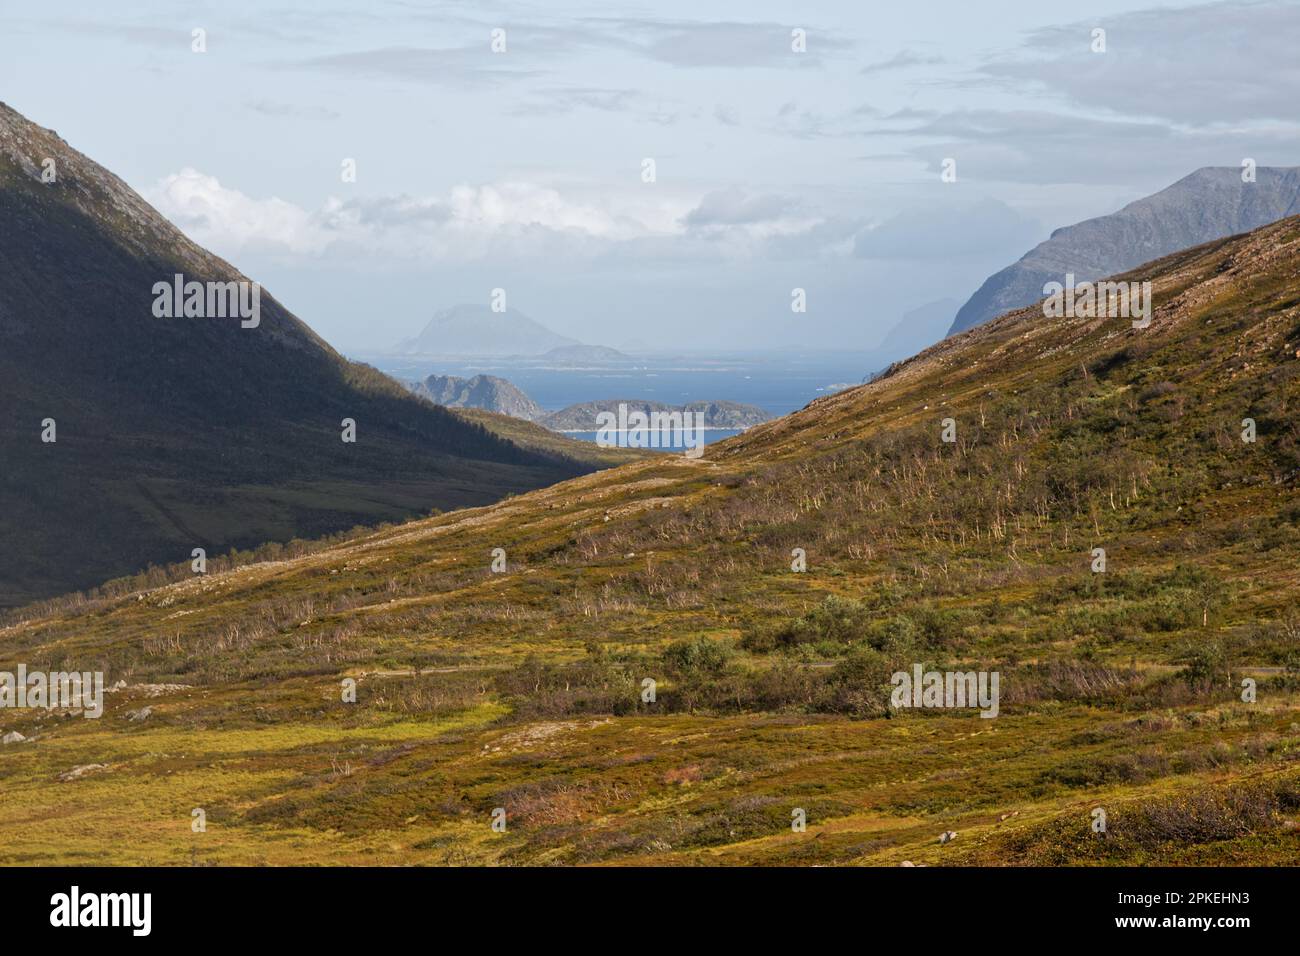 The hills of Kvaløya Island and the Norwegian Sea in the background Stock Photo